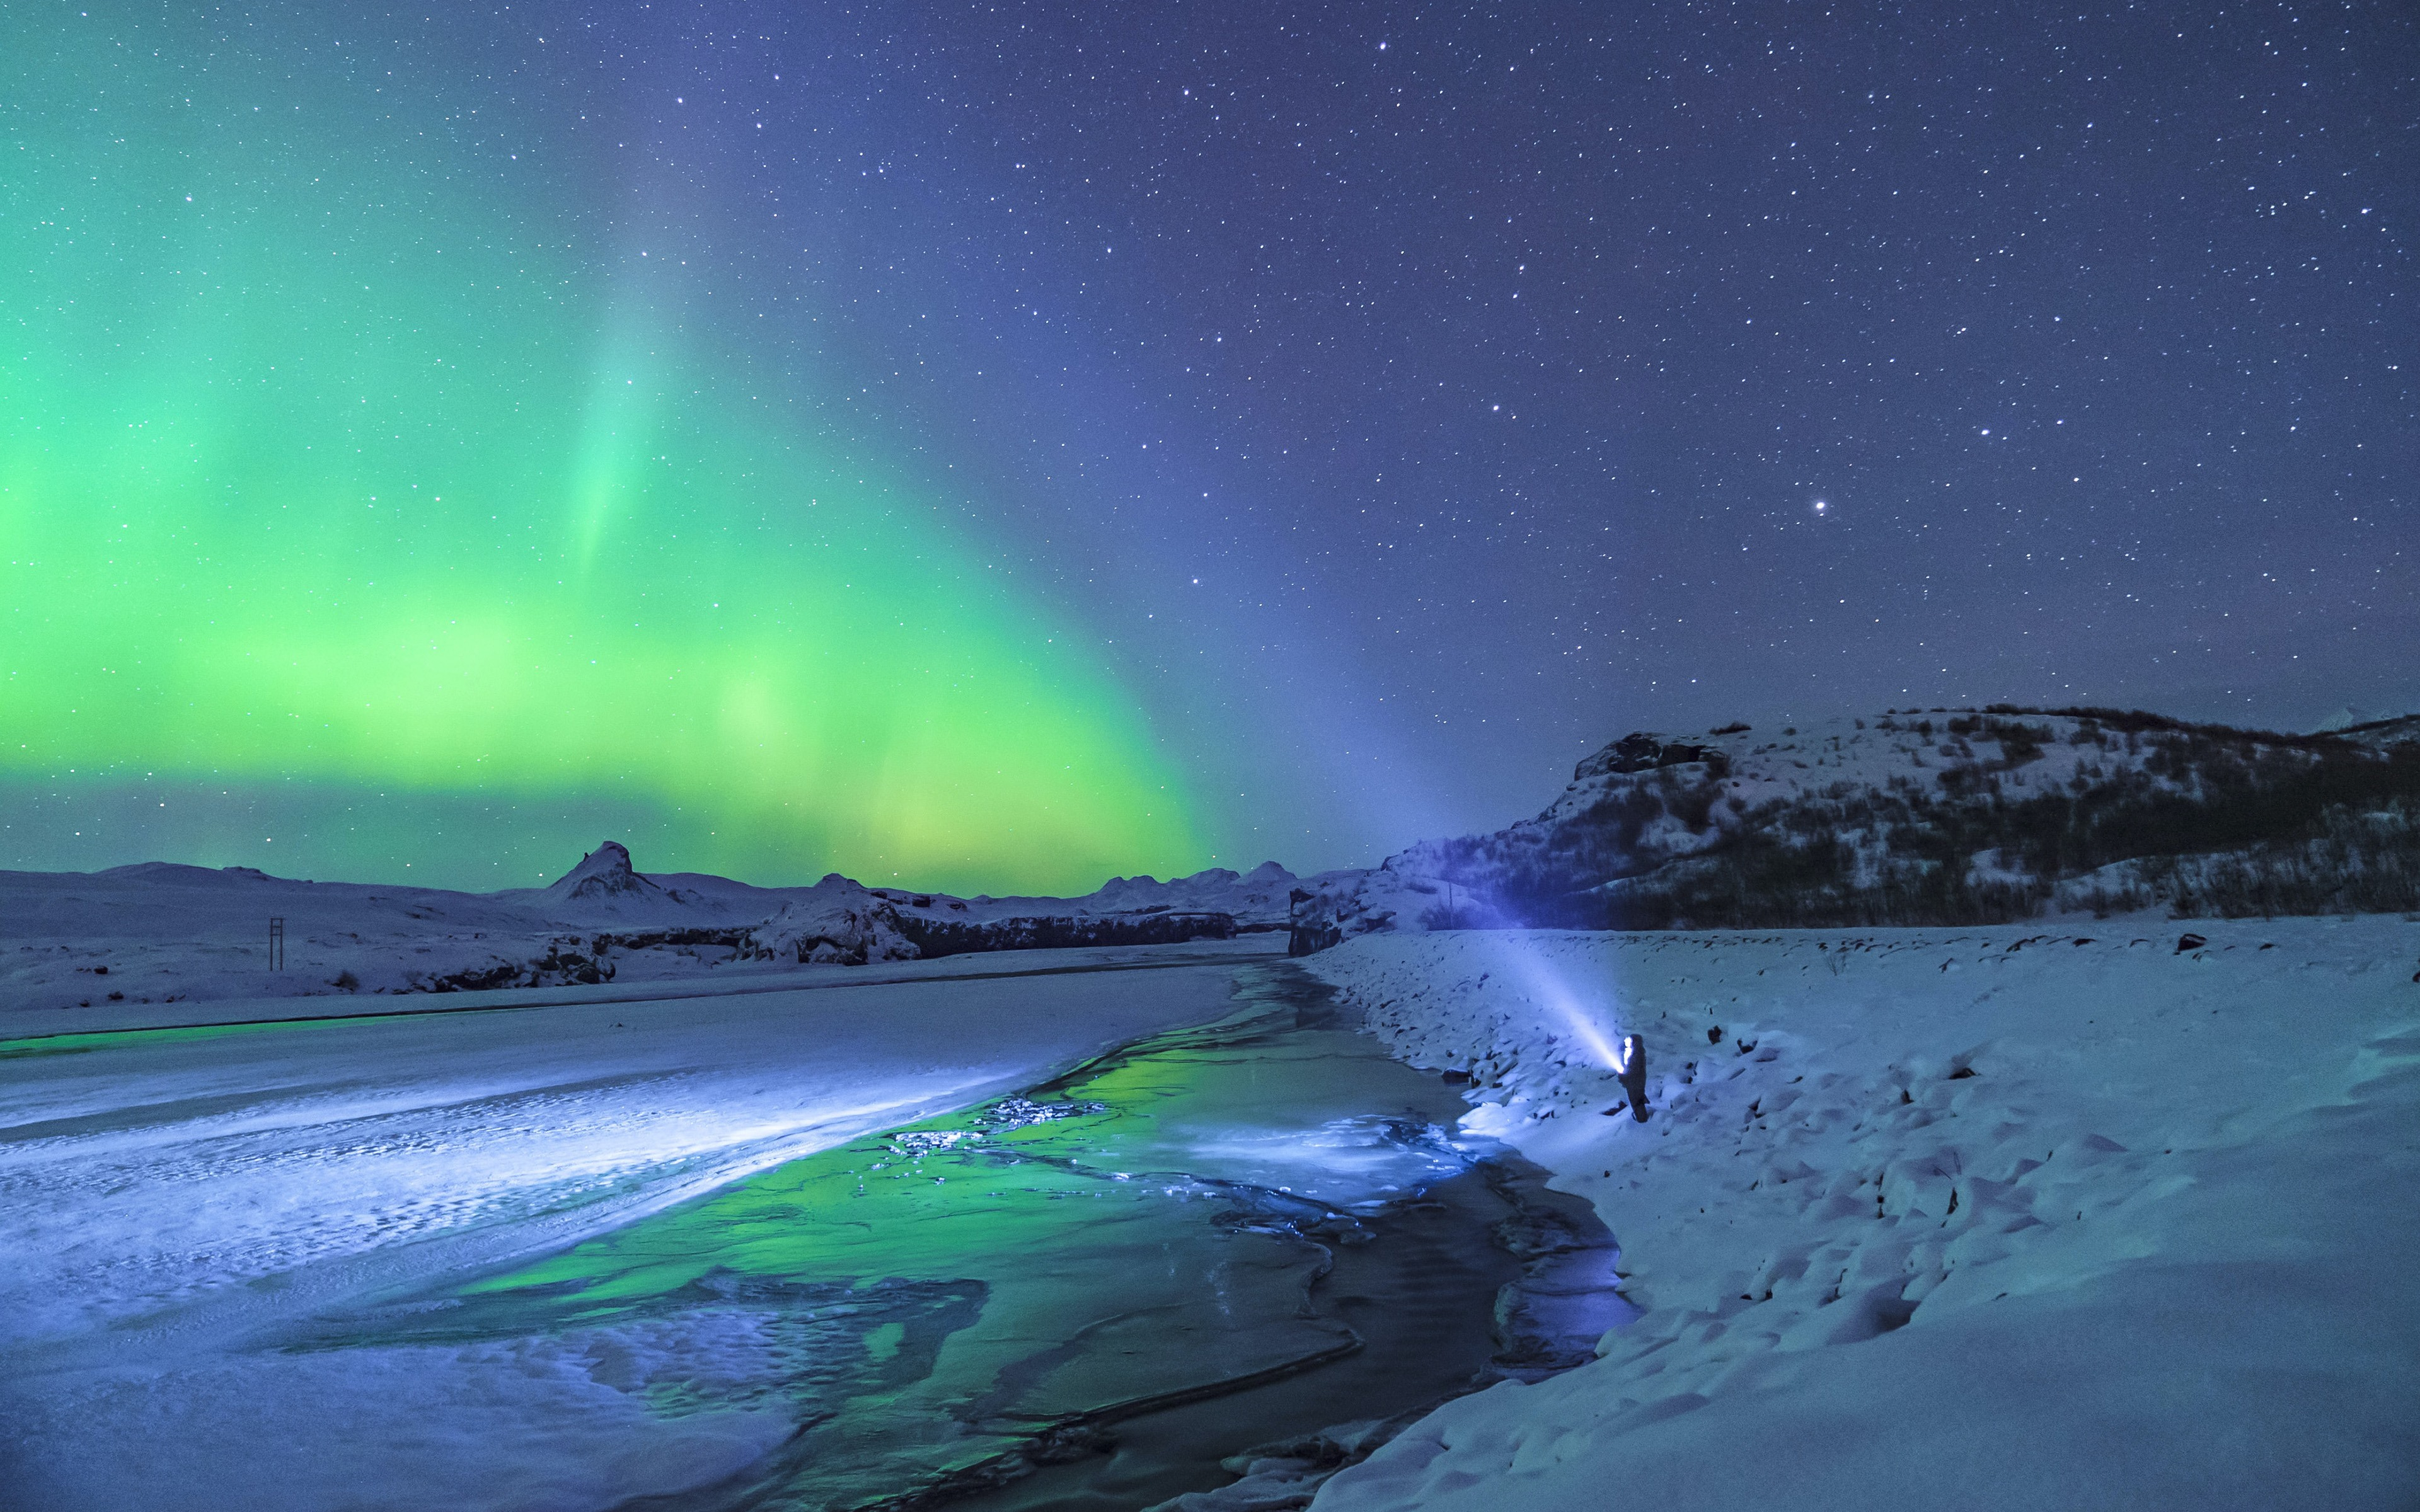 Free photo A man turned on a powerful flashlight into the night sky with the northern lights